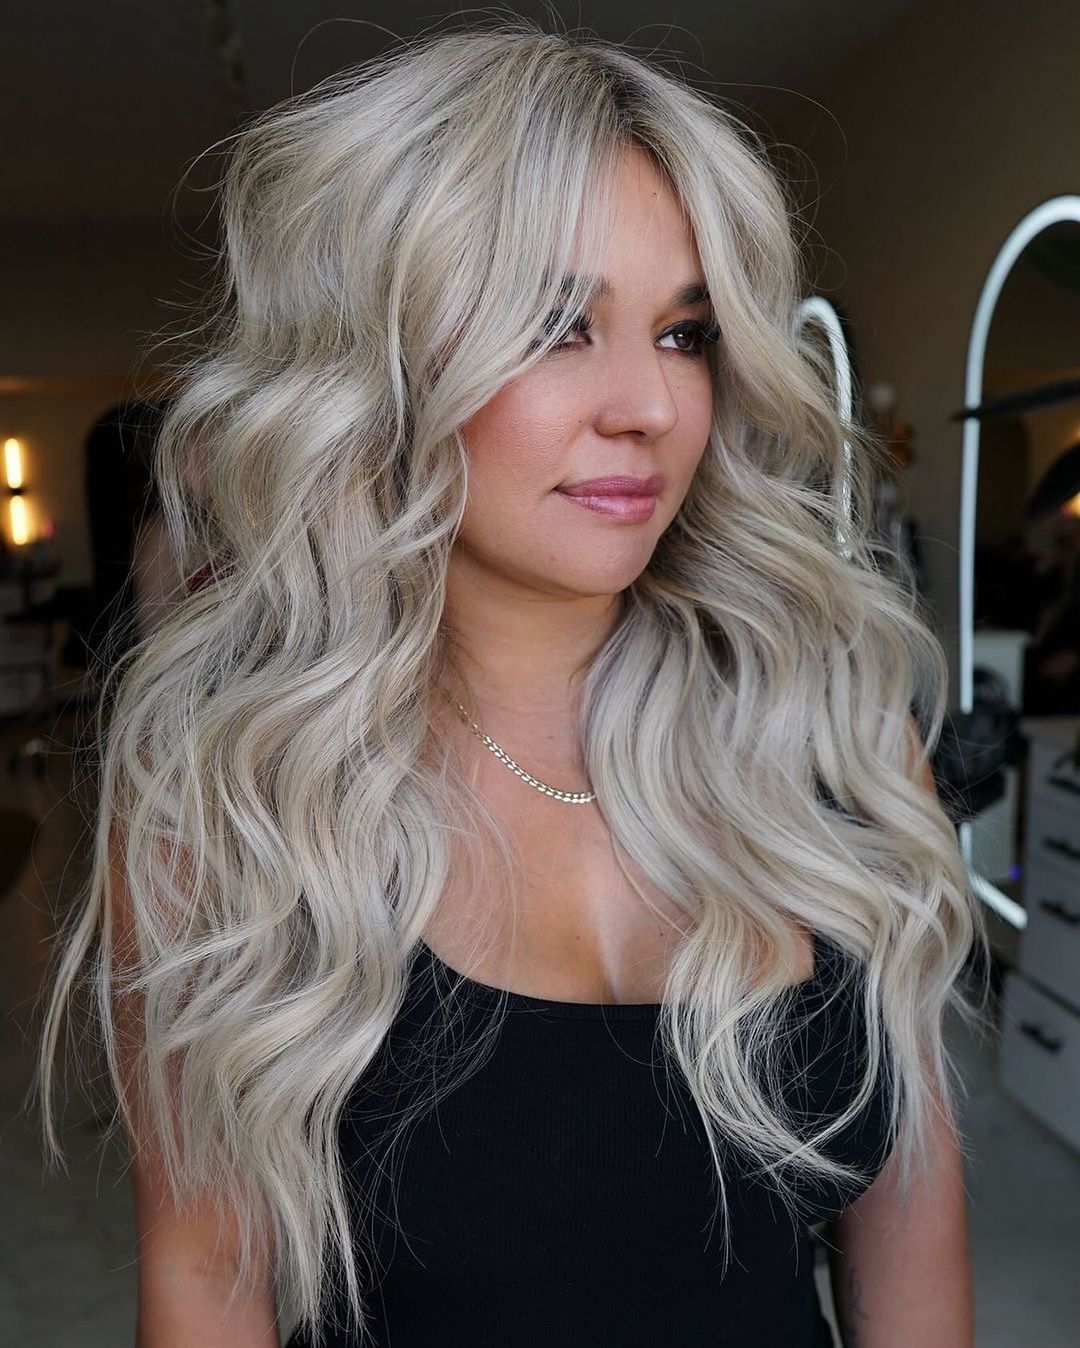 25 Gorgeous Fall Haircut and Color Ideas to Try Now